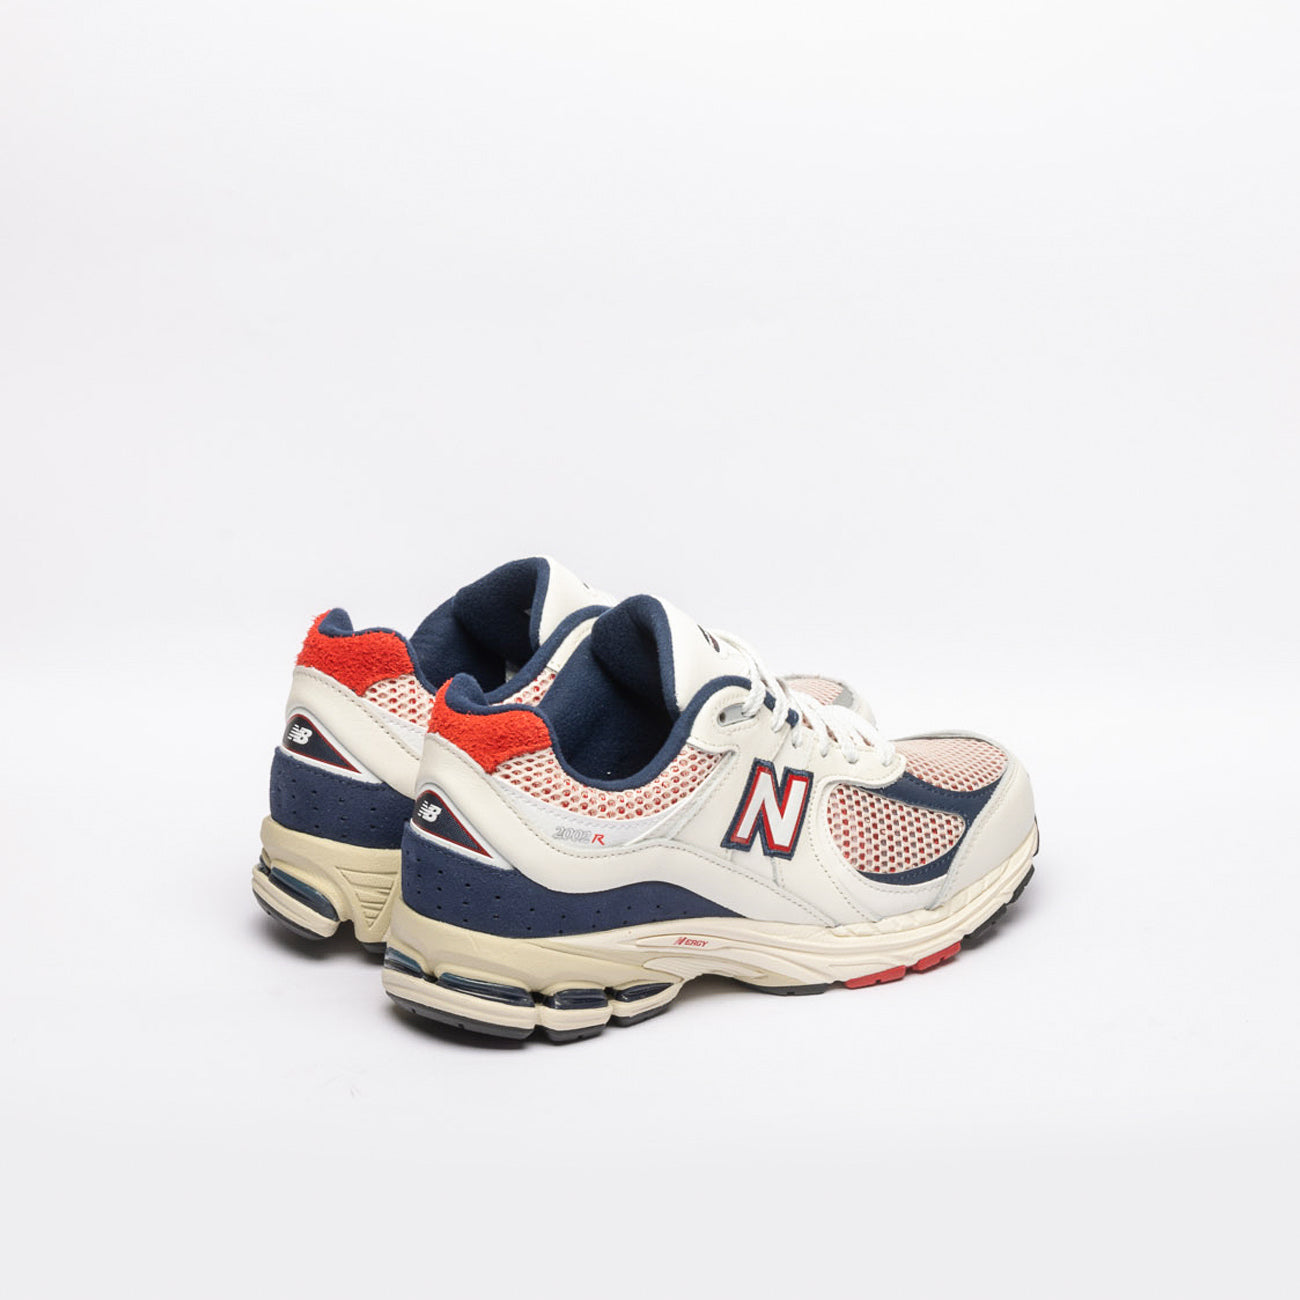 New Balance 2002 white leather running sneaker with blue and red details